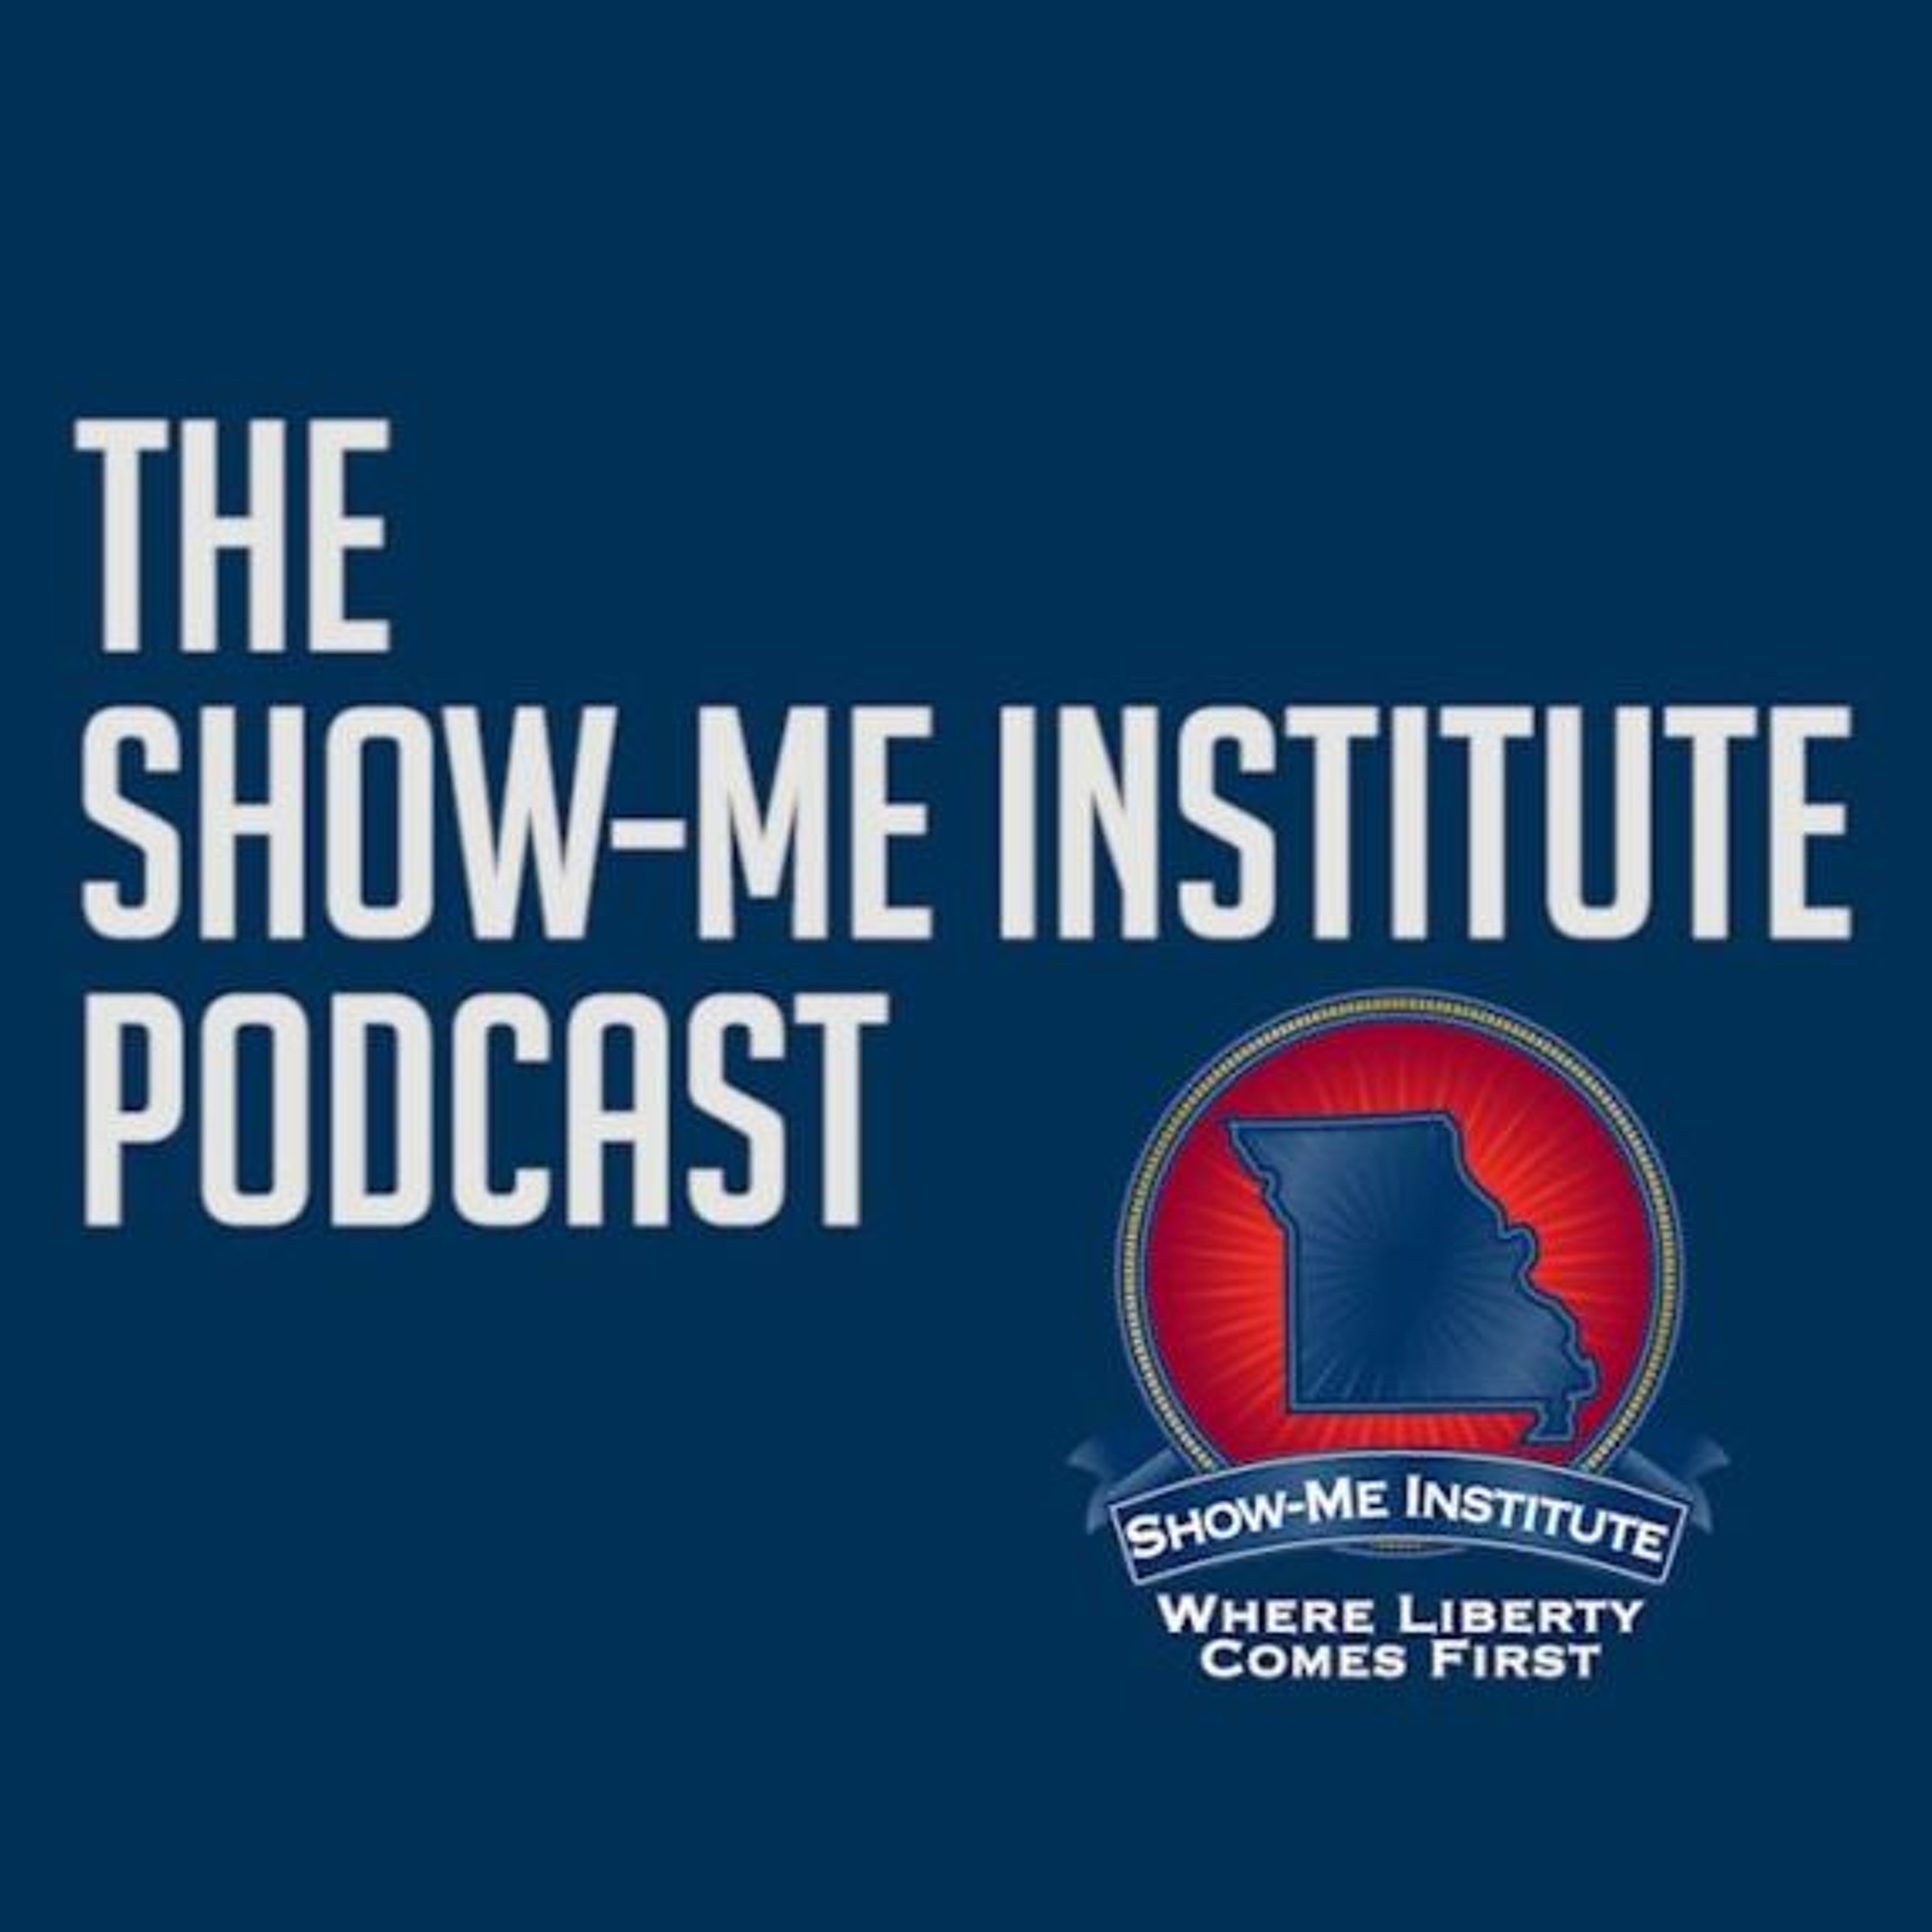 SMI Podcast: How to Tell America’s Story - Lee Habeeb